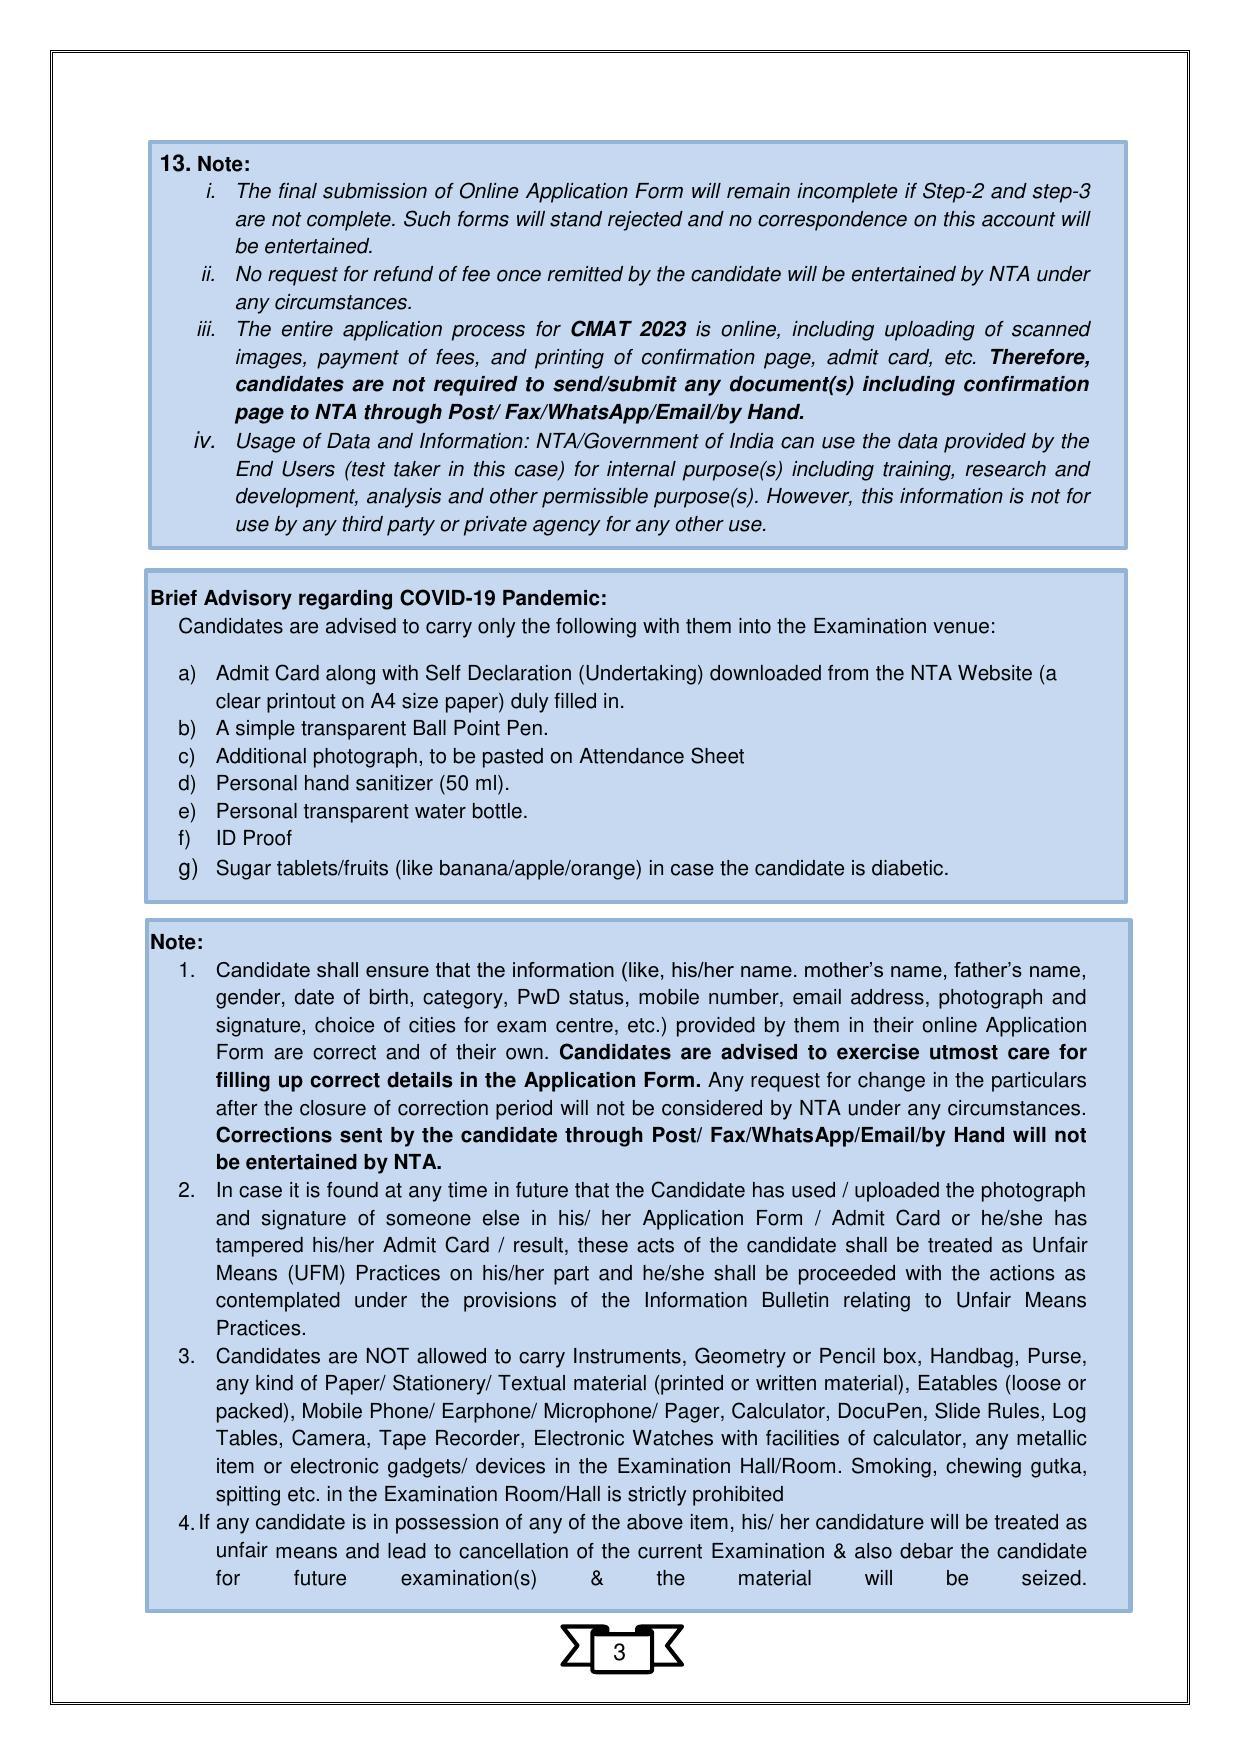 CMAT 2023 Information Bulletin - Page 6